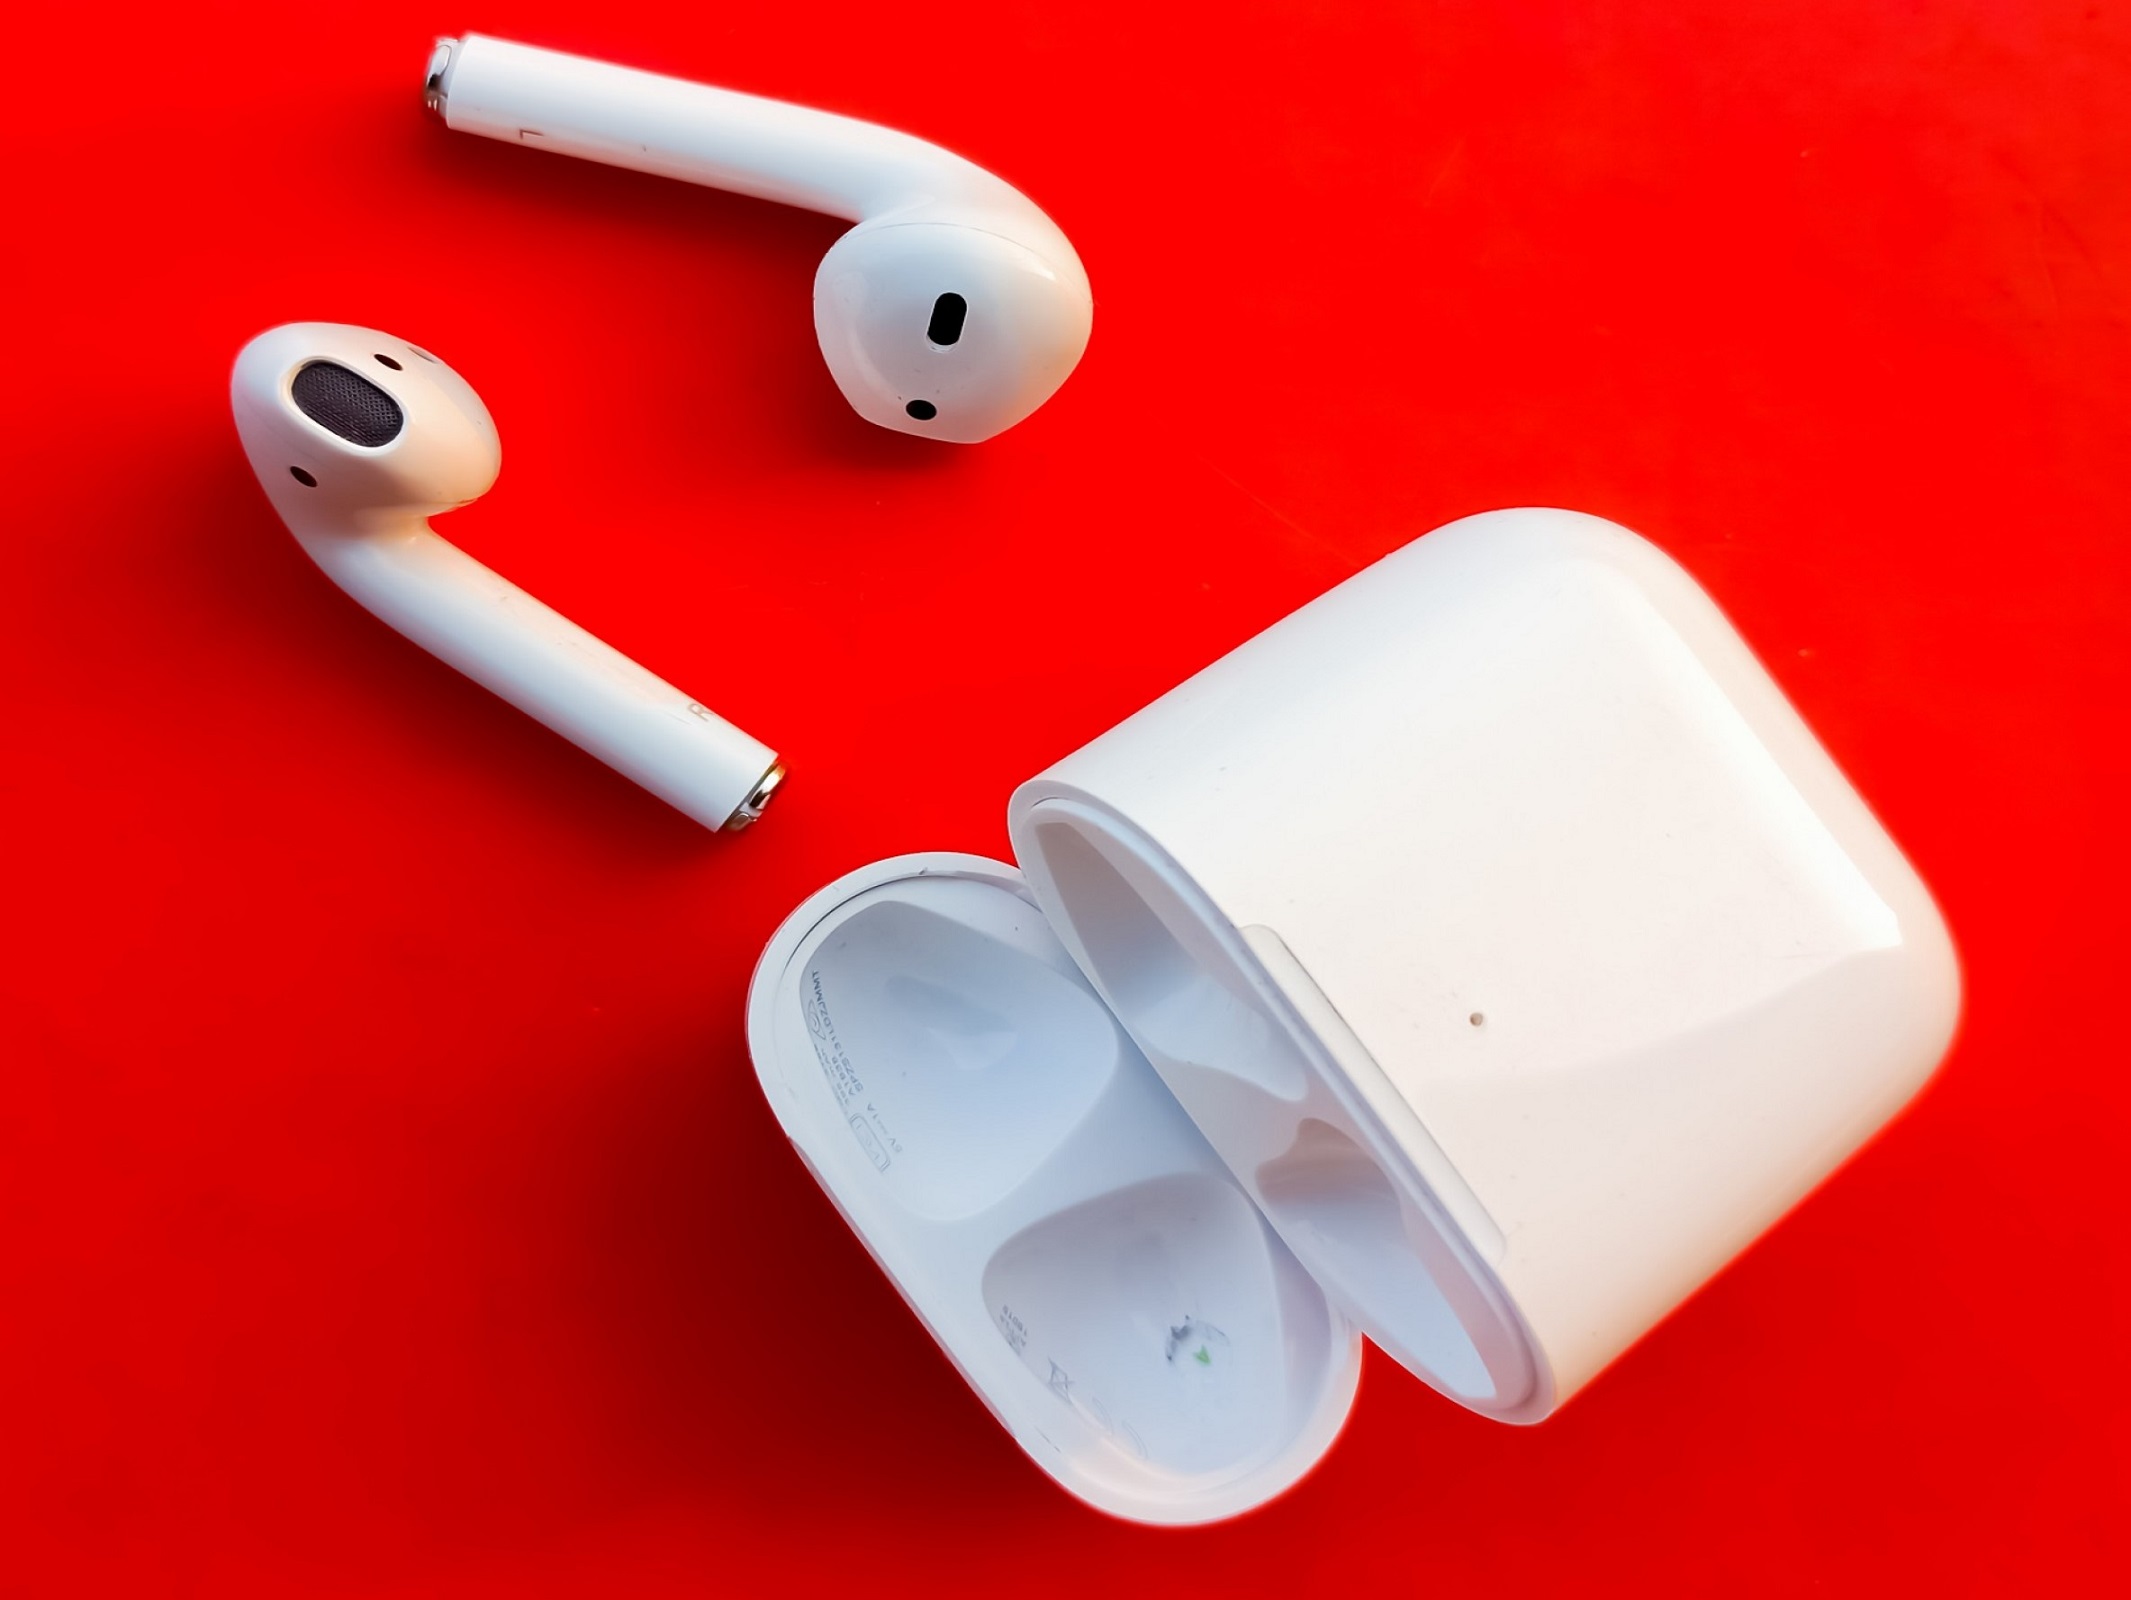 Top 10 Apple Headphones and Earbuds and Their Features